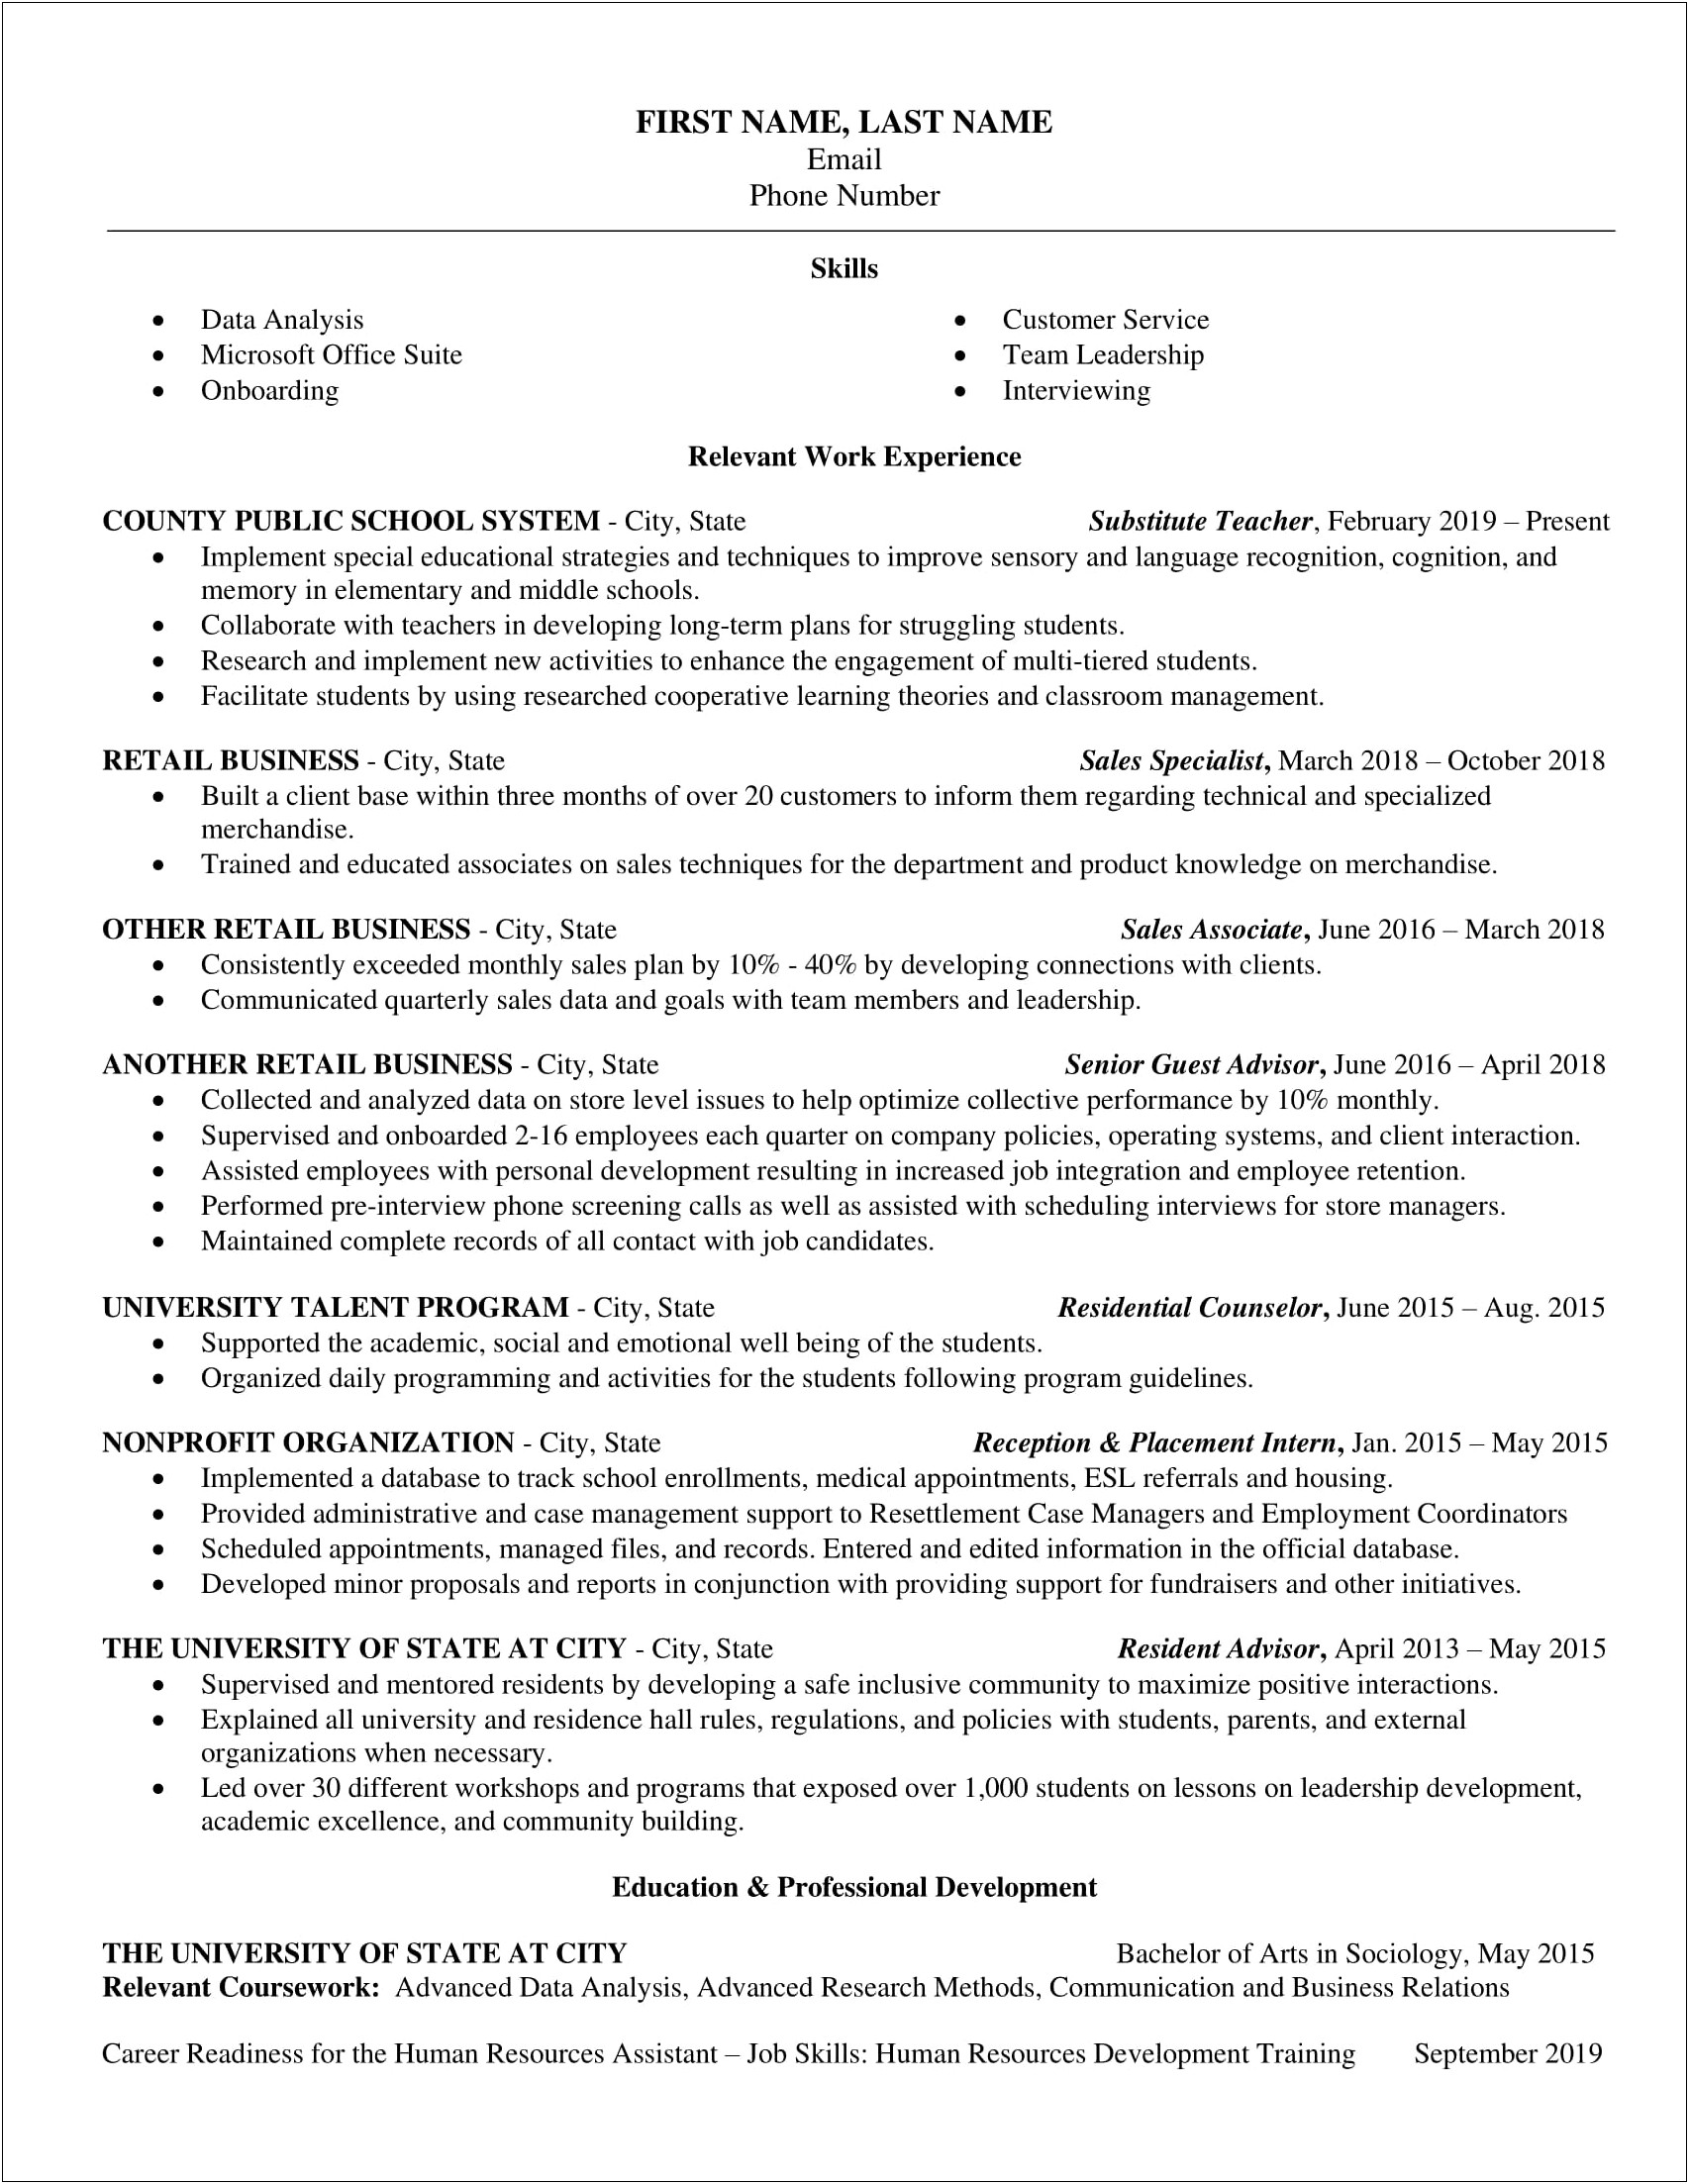 Resume Objective Examples Entry Level Human Resources